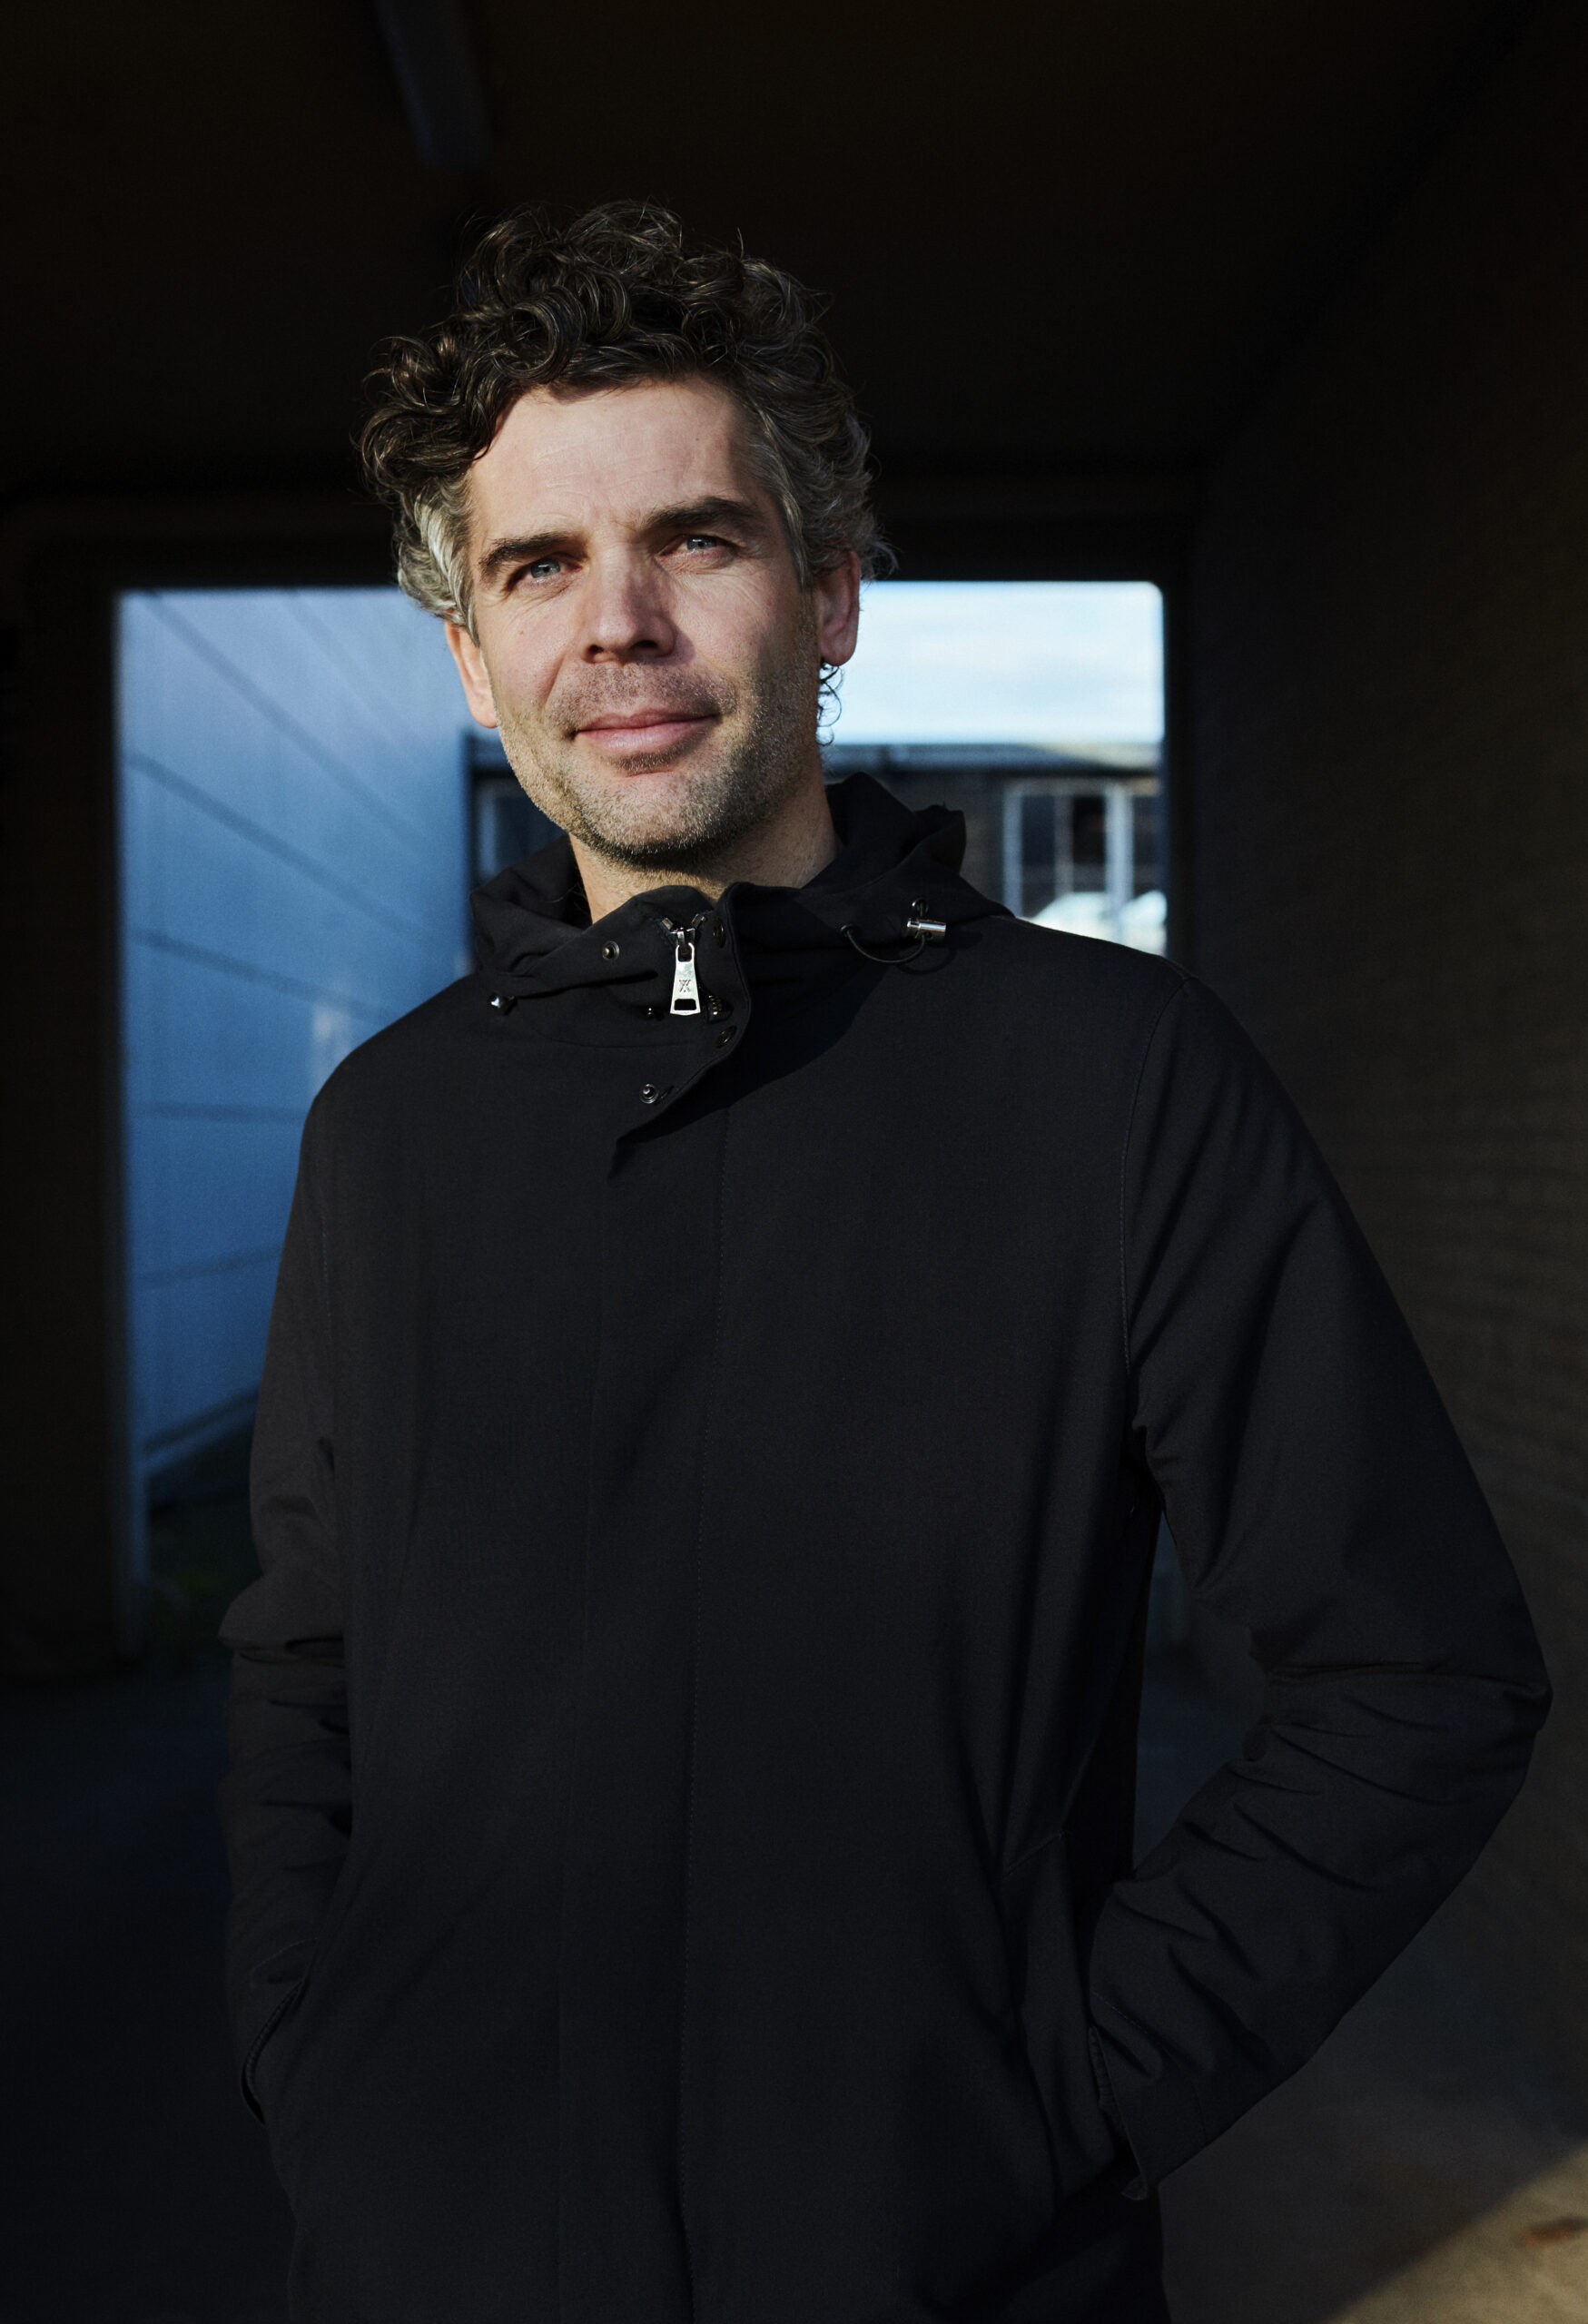 Joost Baks, architect, founding partner at Space Encounters Architects Amsterdam